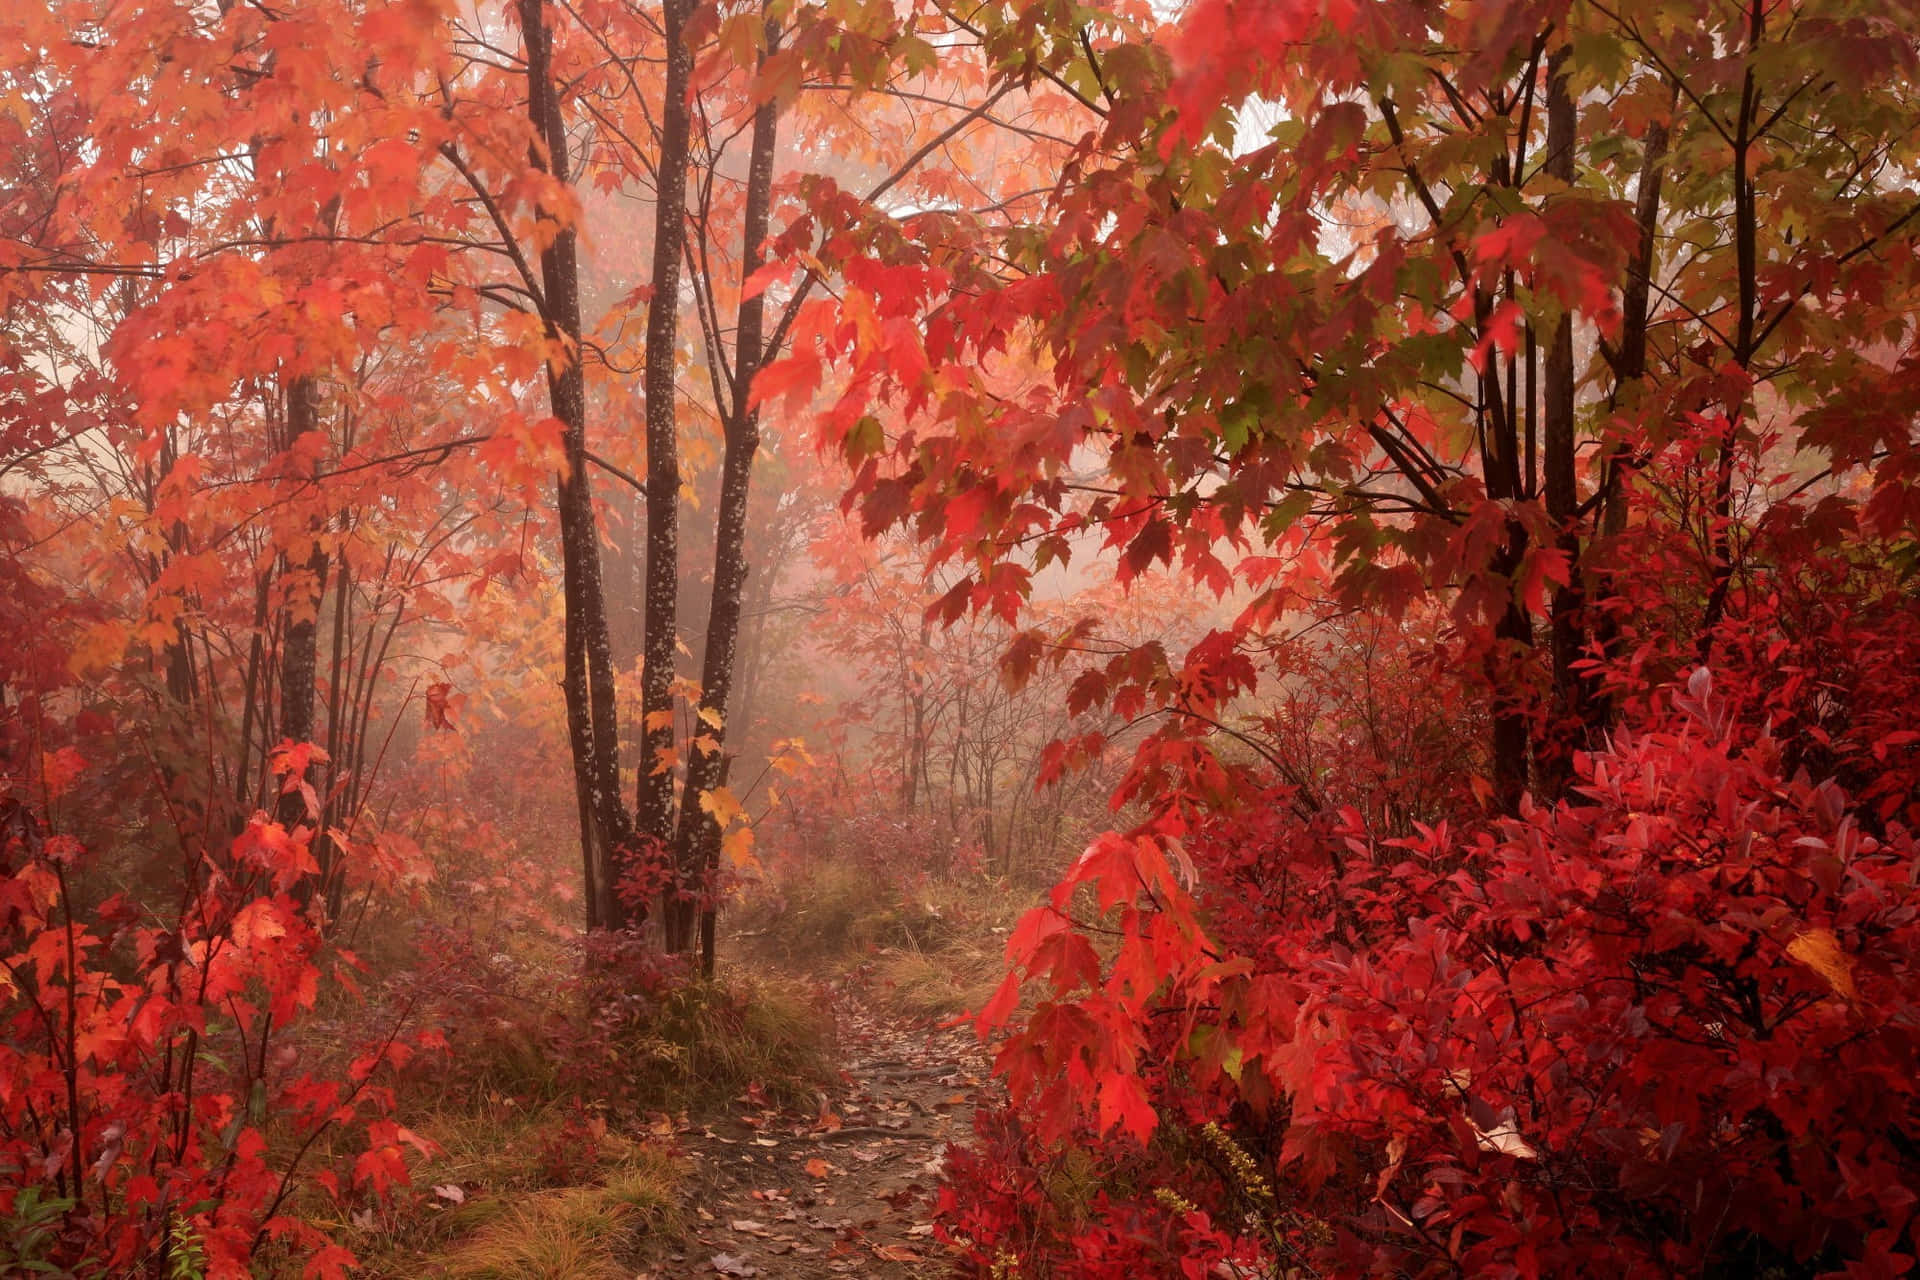 Enchanting Fall Mist in the Forest Wallpaper